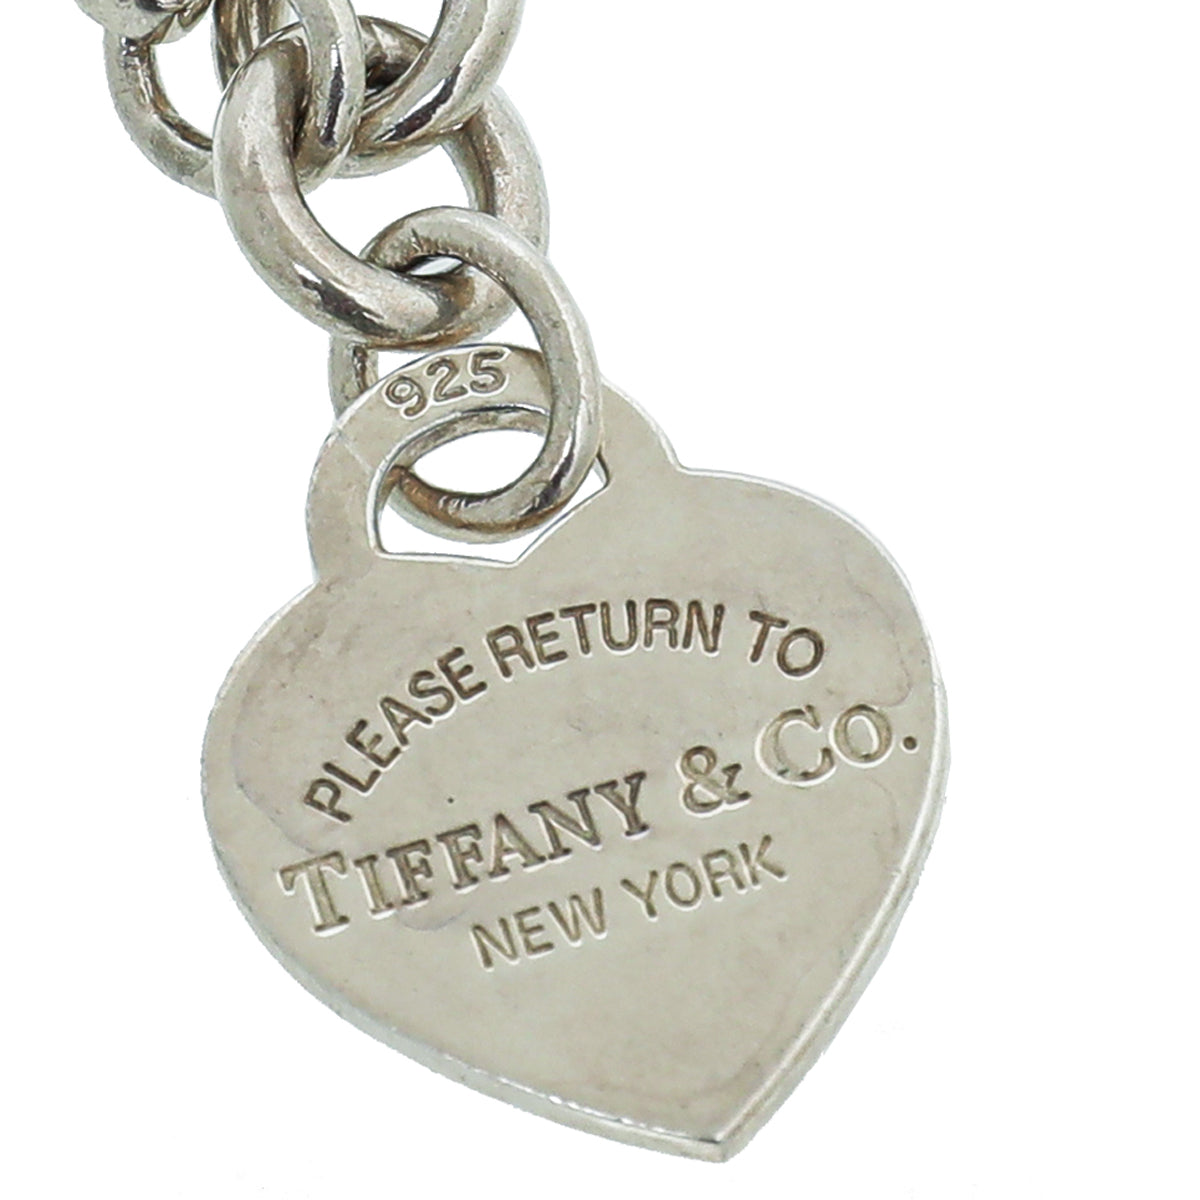 Tiffany & Co Sterling Silver Chain Link Heart Tag Charm Bracelet